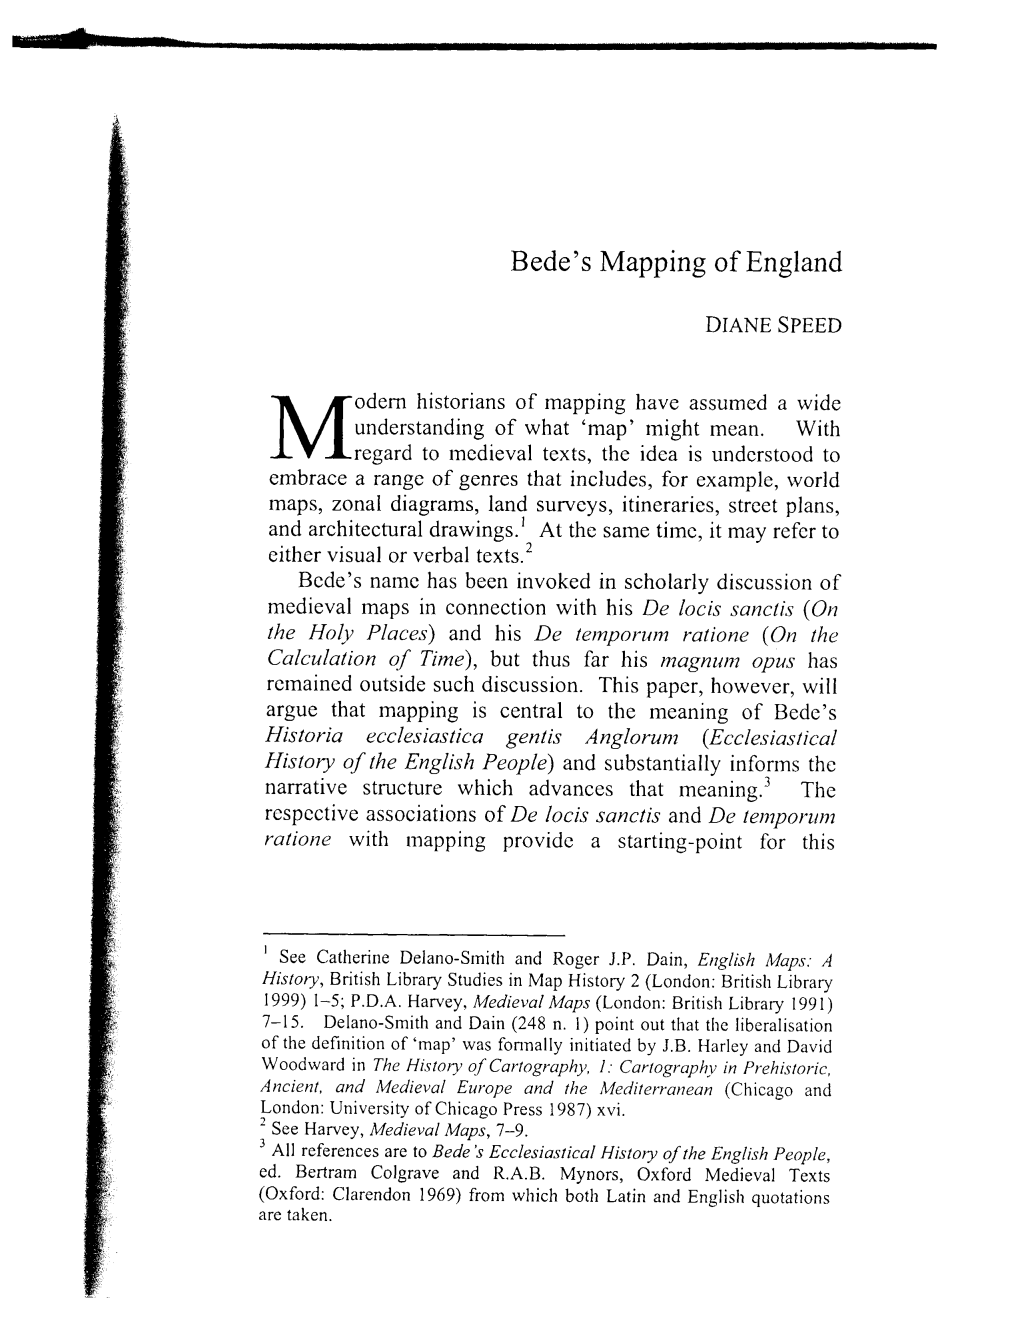 Bede's Mapping of England